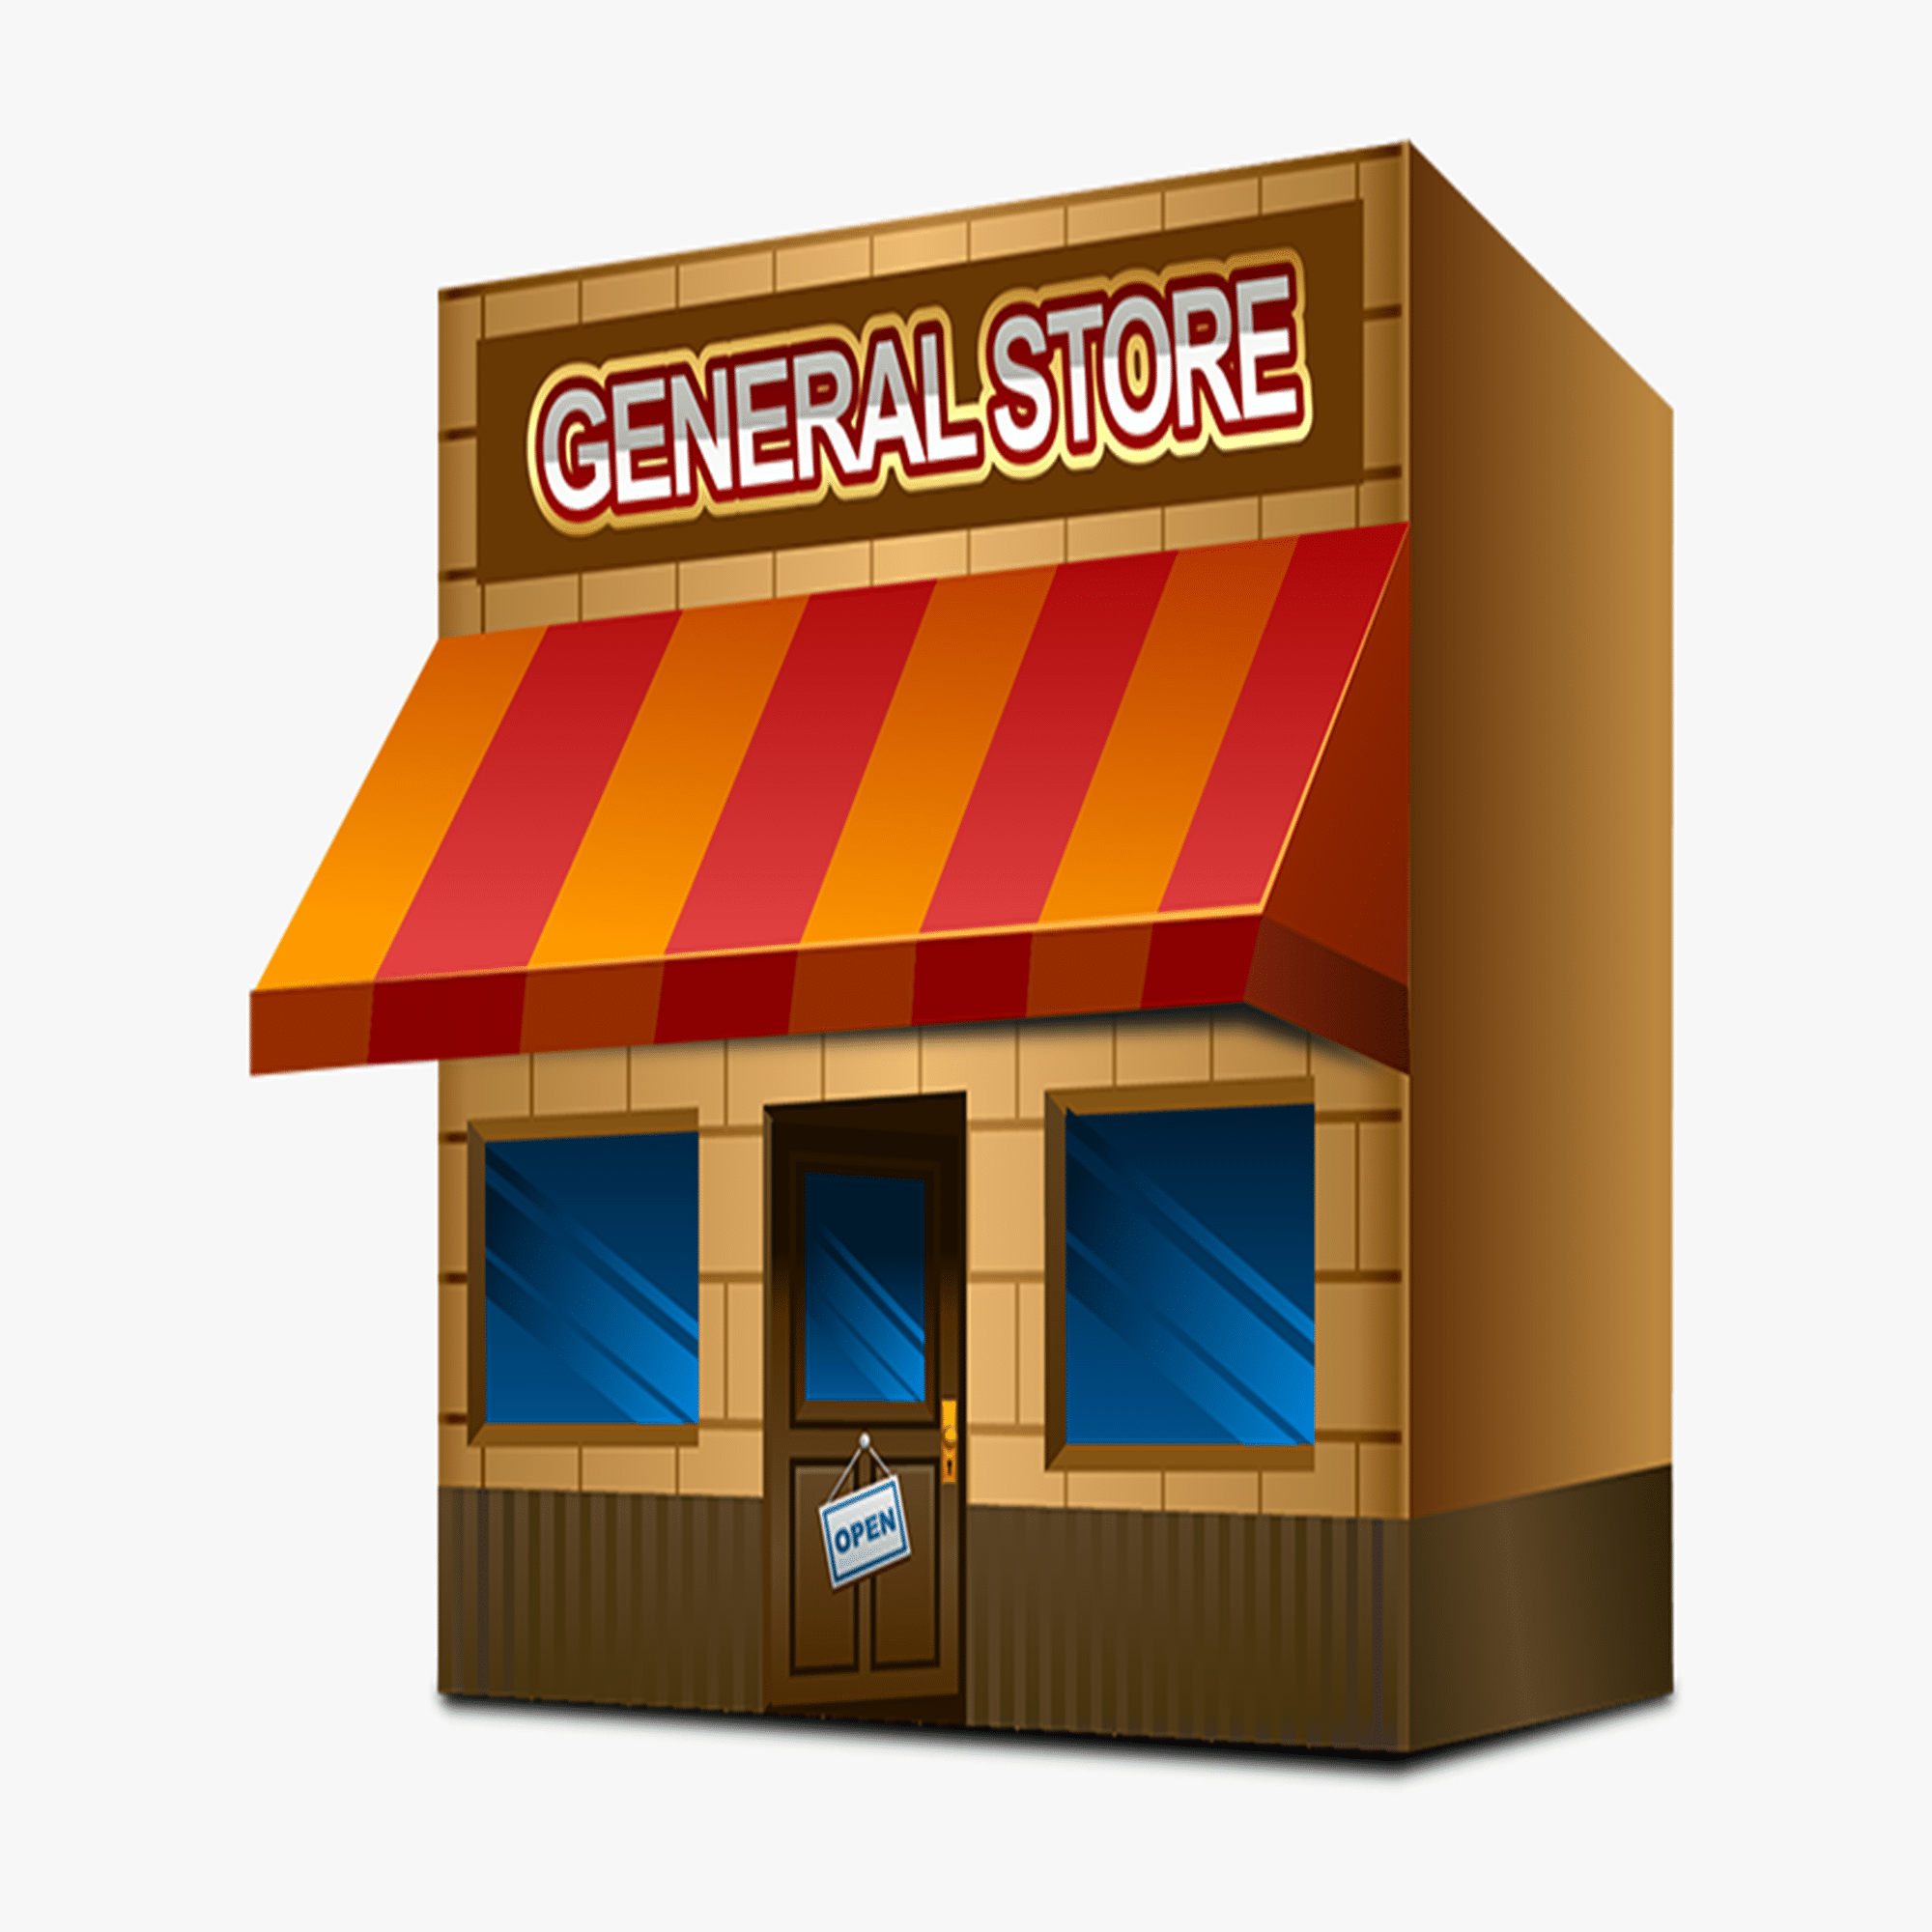 WAYS TO GROW A GENERAL STORE